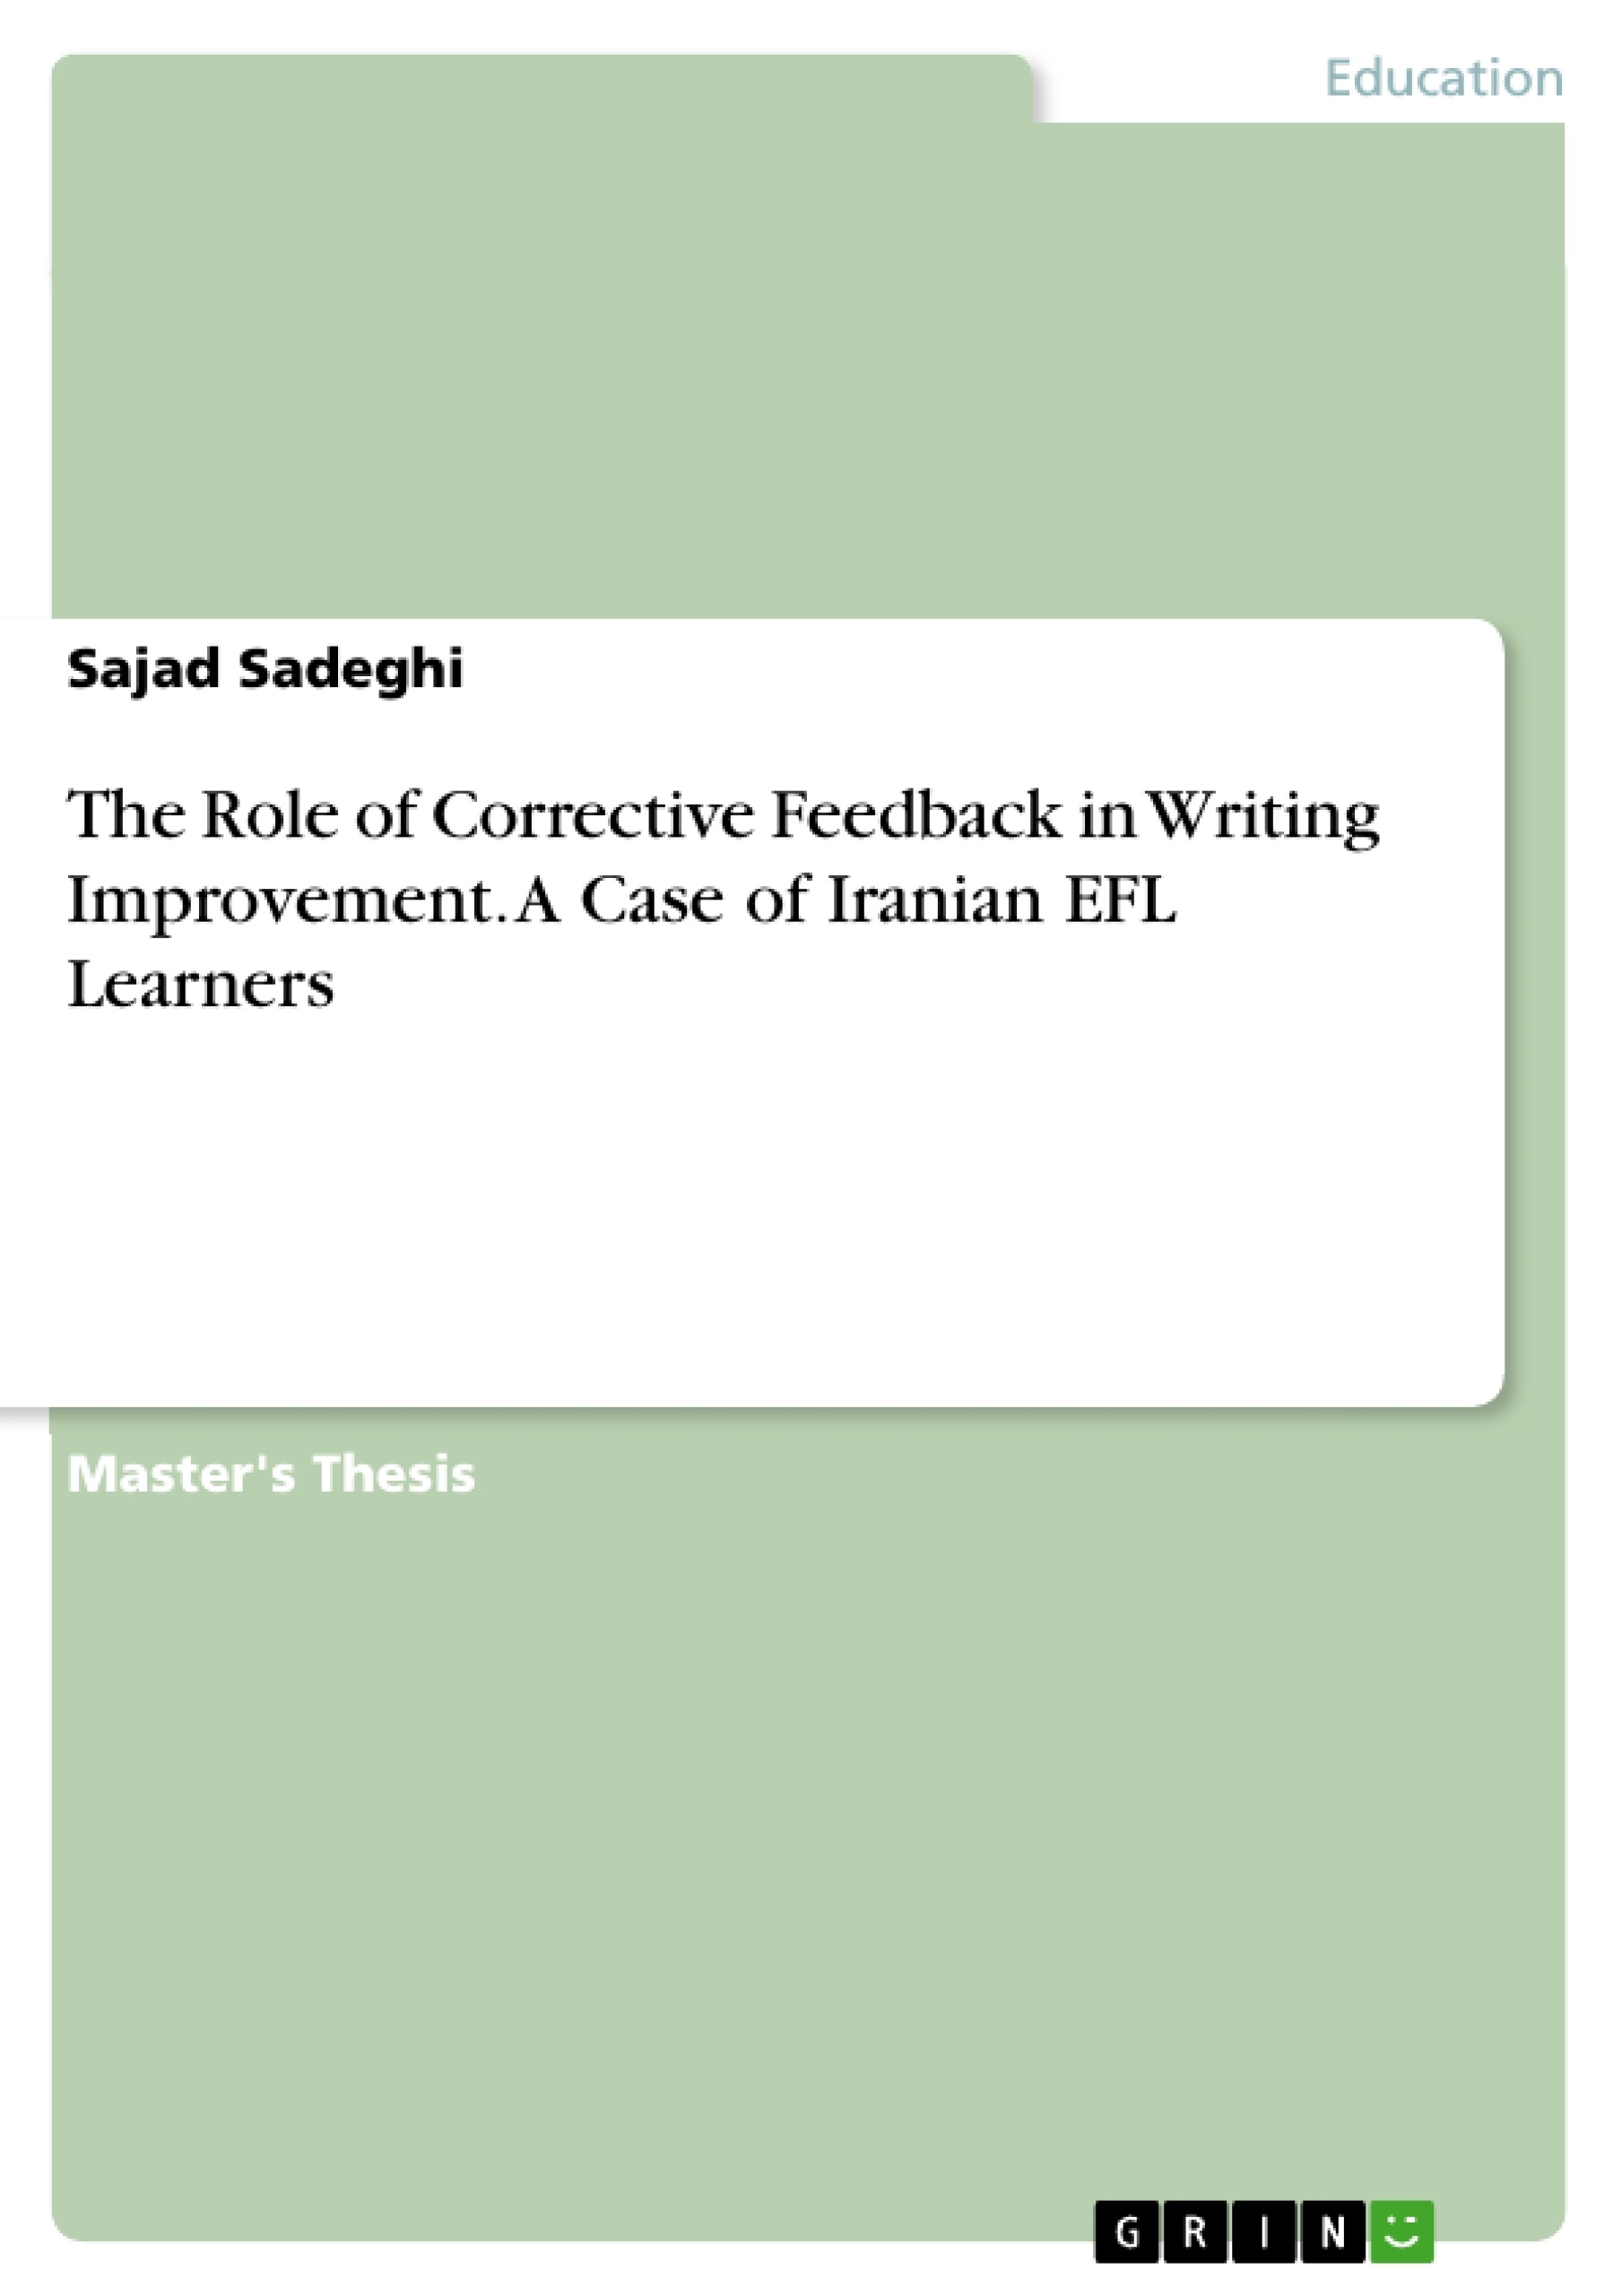 Titel: The Role of Corrective Feedback in Writing Improvement. A Case of Iranian EFL Learners